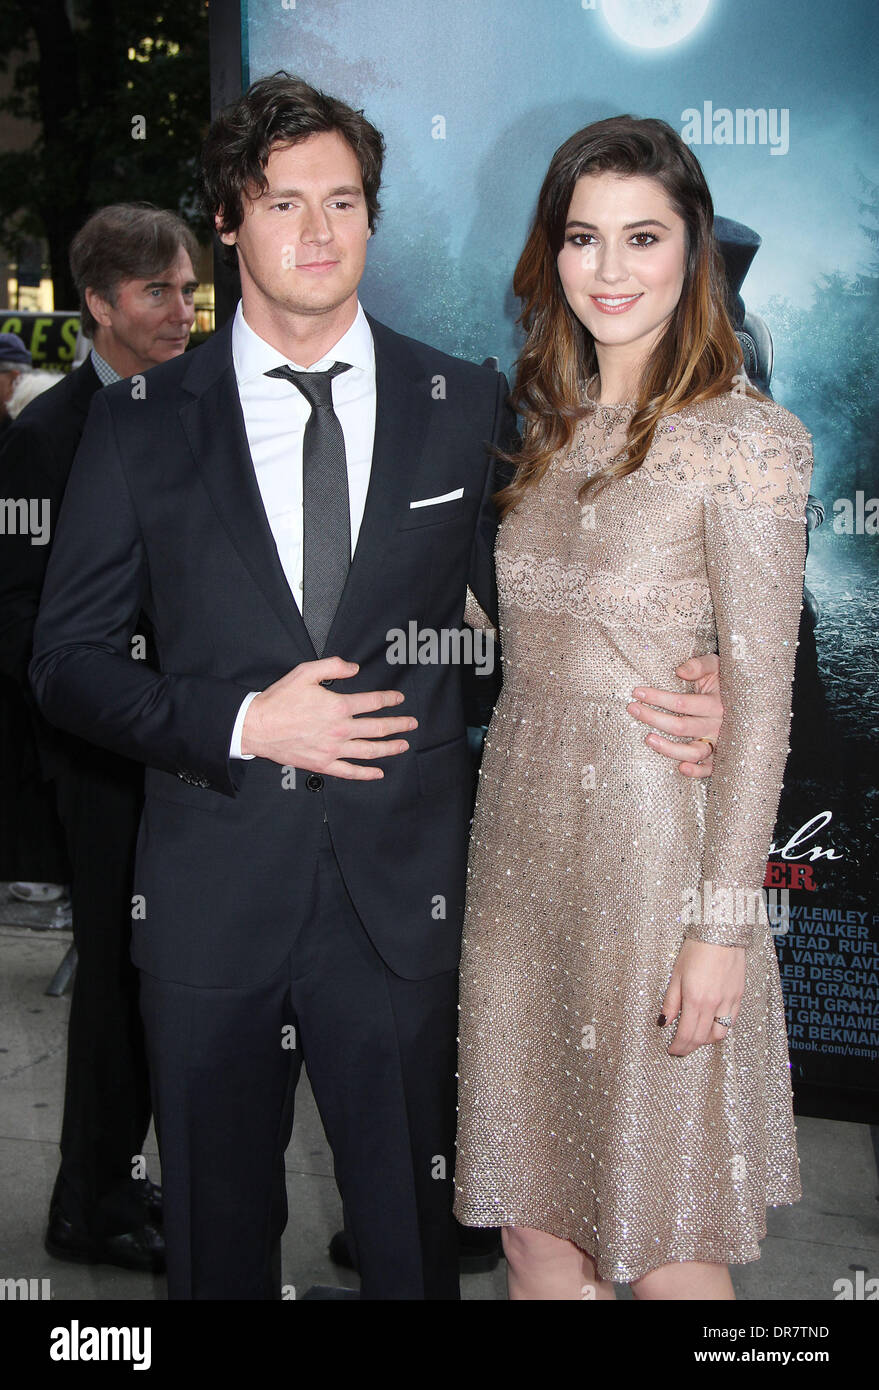 Benjamin Walker, Mary Elizabeth Winstead, the premiere of Abraham Lincoln: Vampire Hunter at the AMC Loews Lincoln Square. New City, USA - 18.06.12 Photo - Alamy